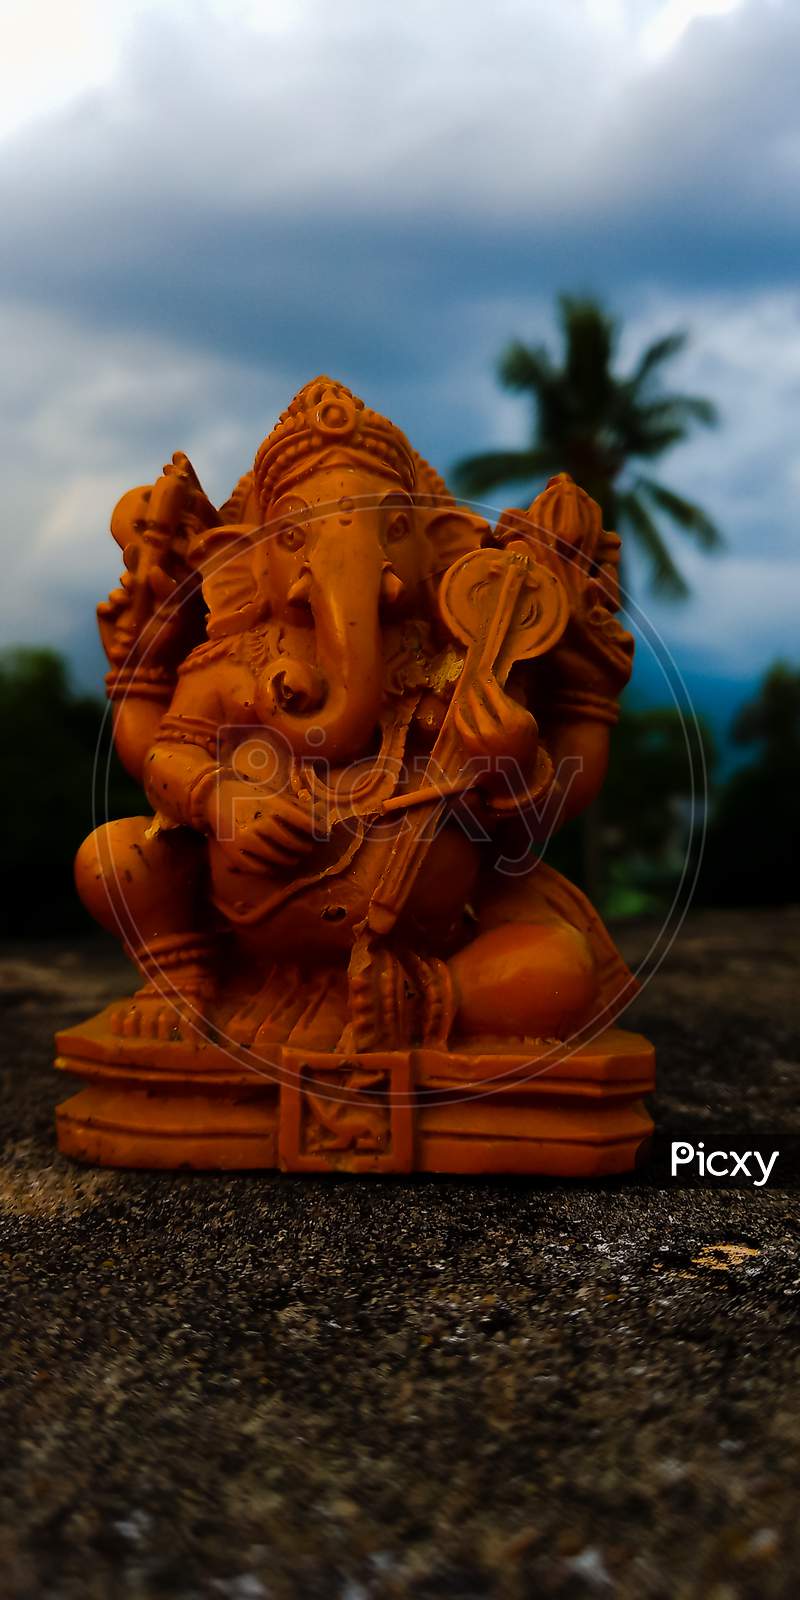 Image of The lord vinayagar-IE036359-Picxy